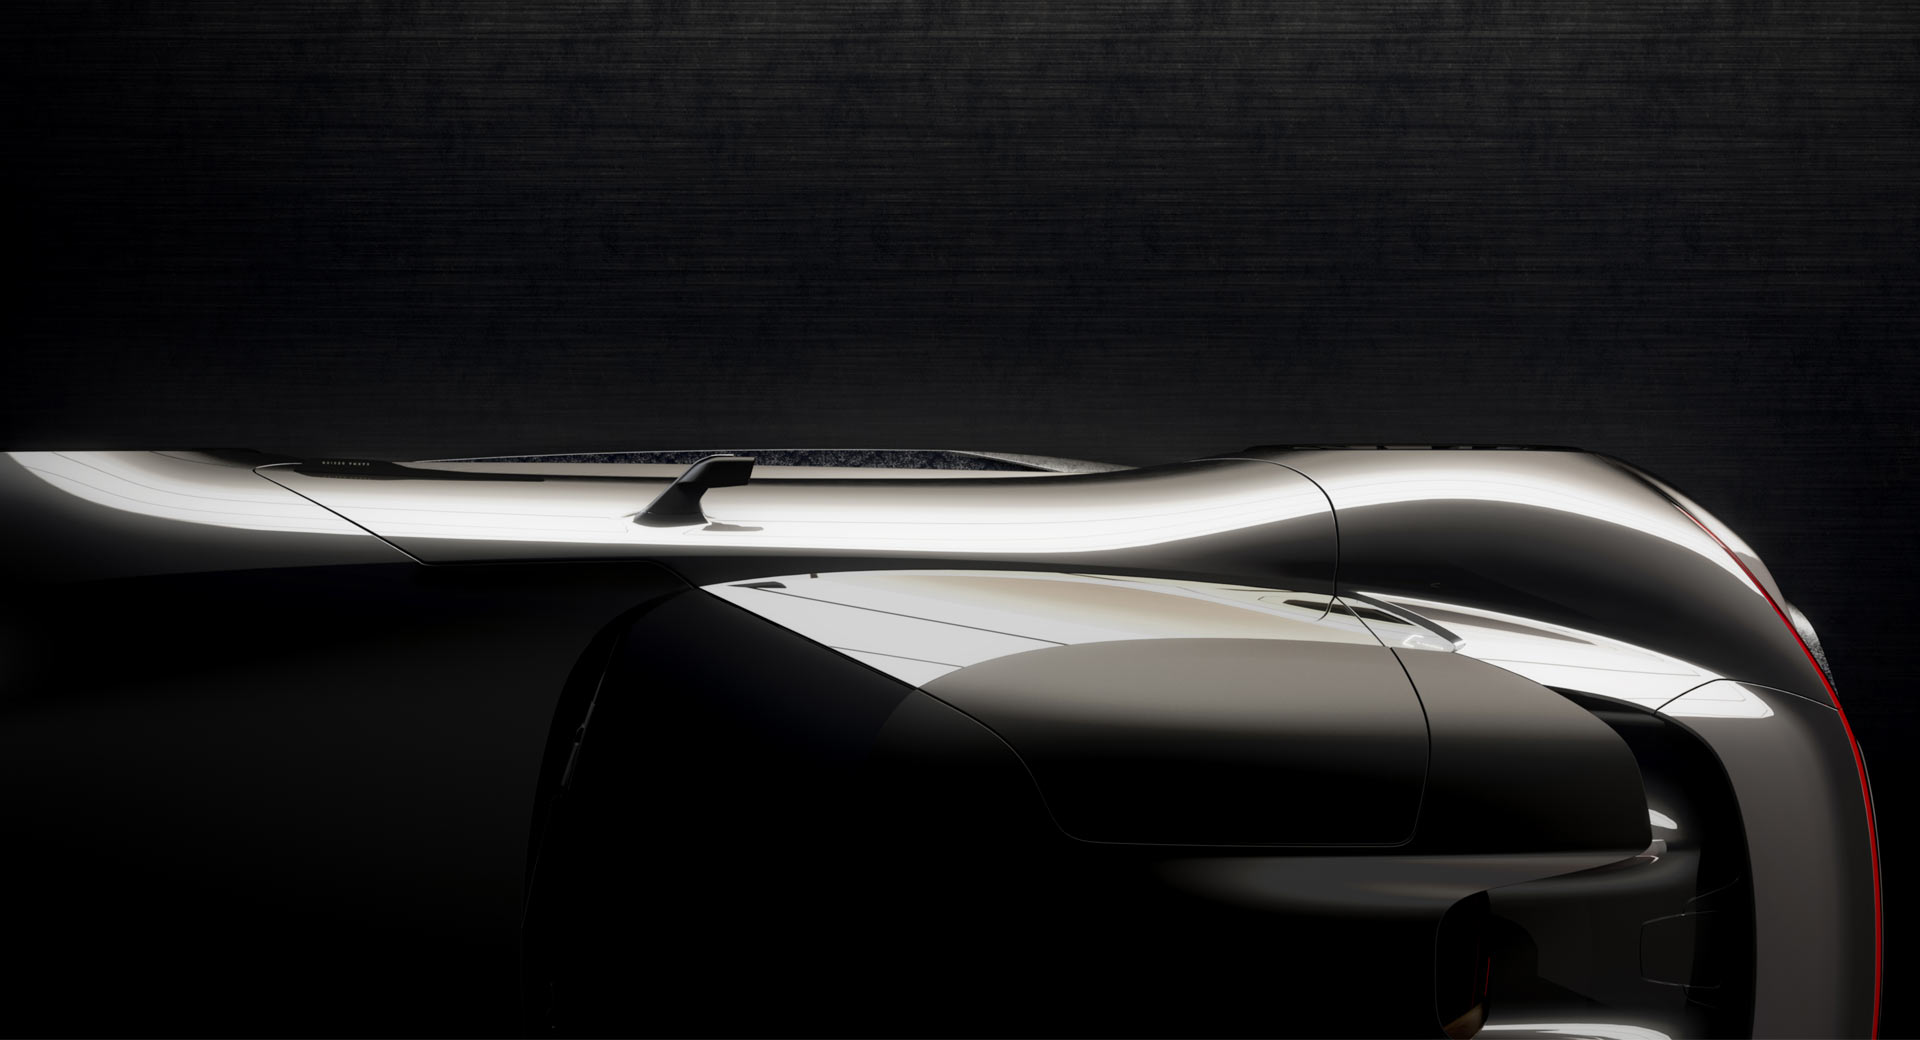 Karma SC2 Concept Teased, Appears To Be A Stylish Coupe With Gullwing Doors